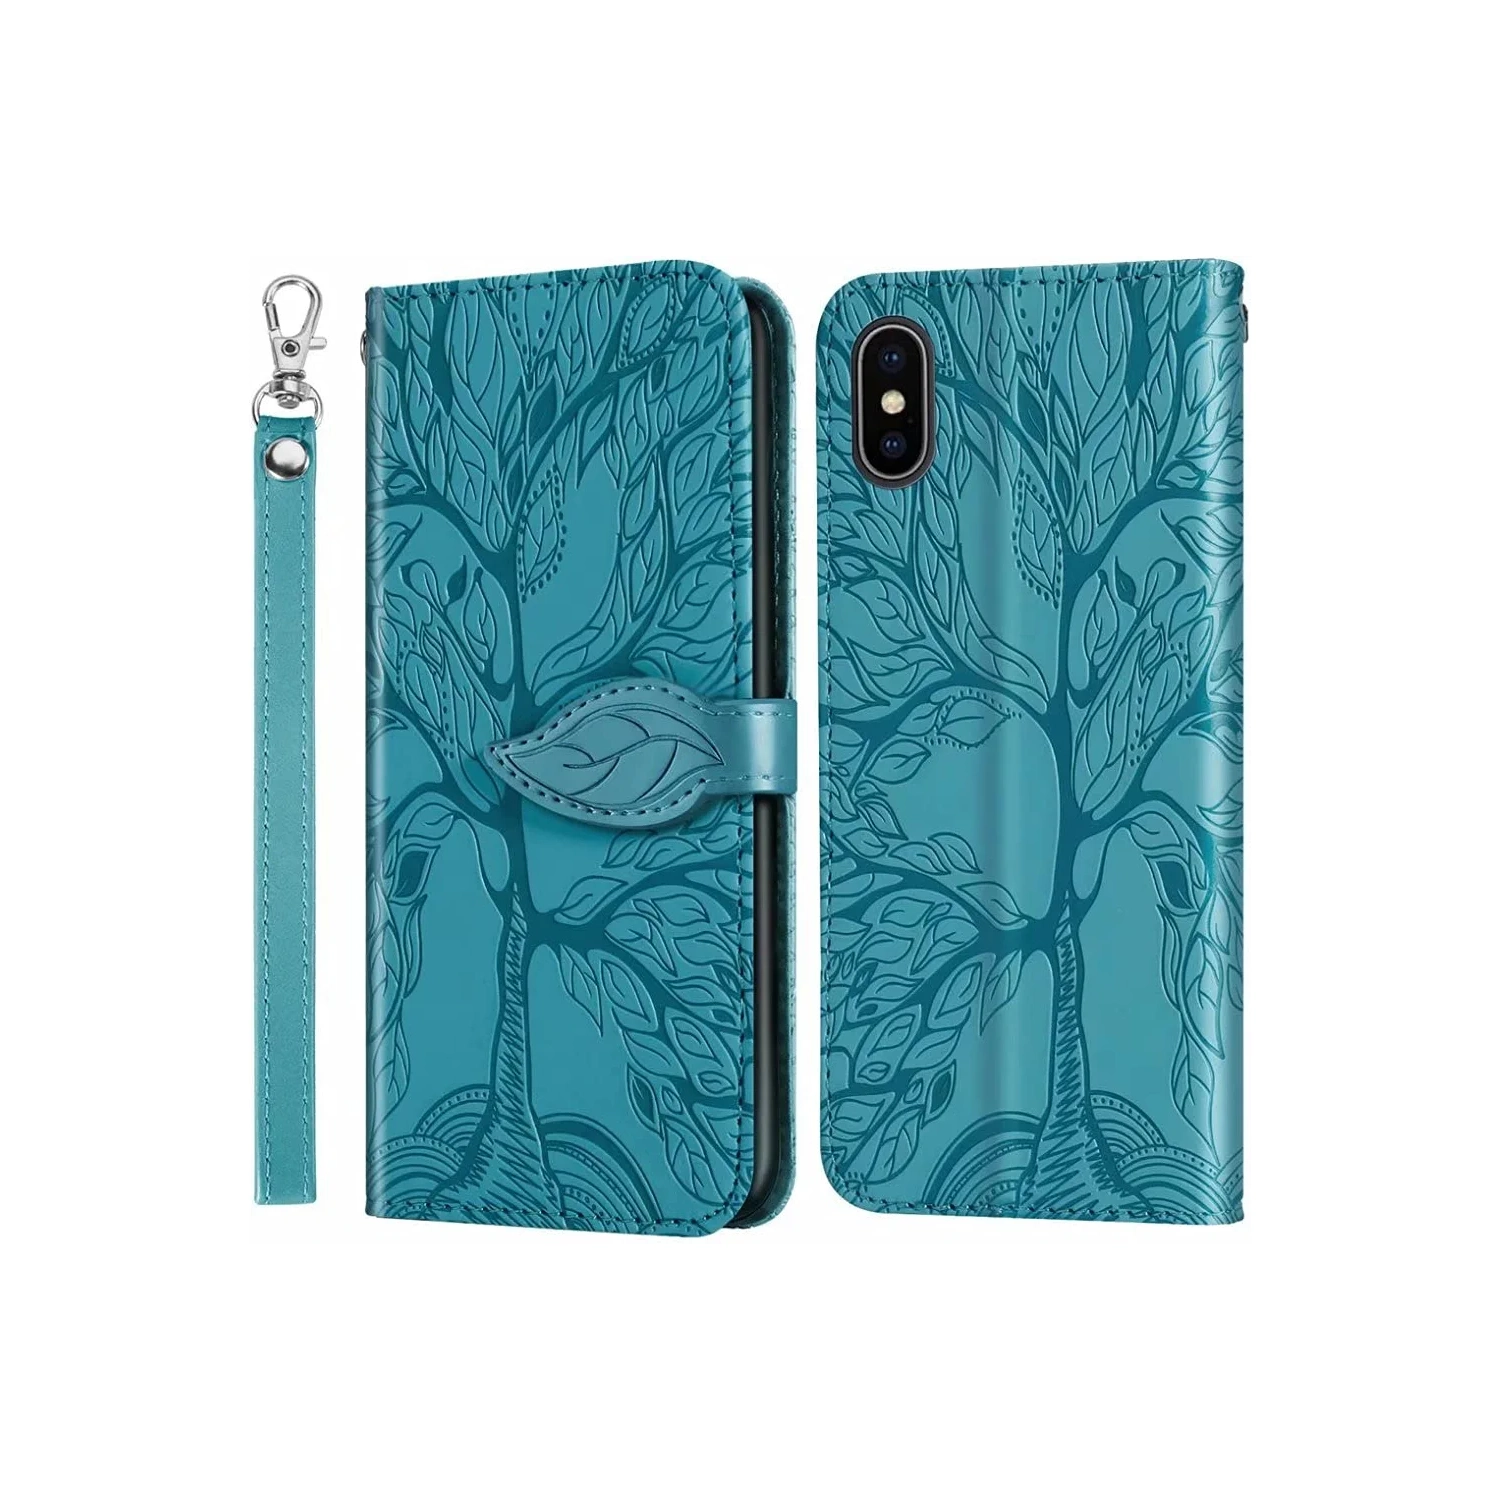 Premium PU Leather Embossed Tree Wallet Case with card slots and wrist strap for iPhone XS Max A1921